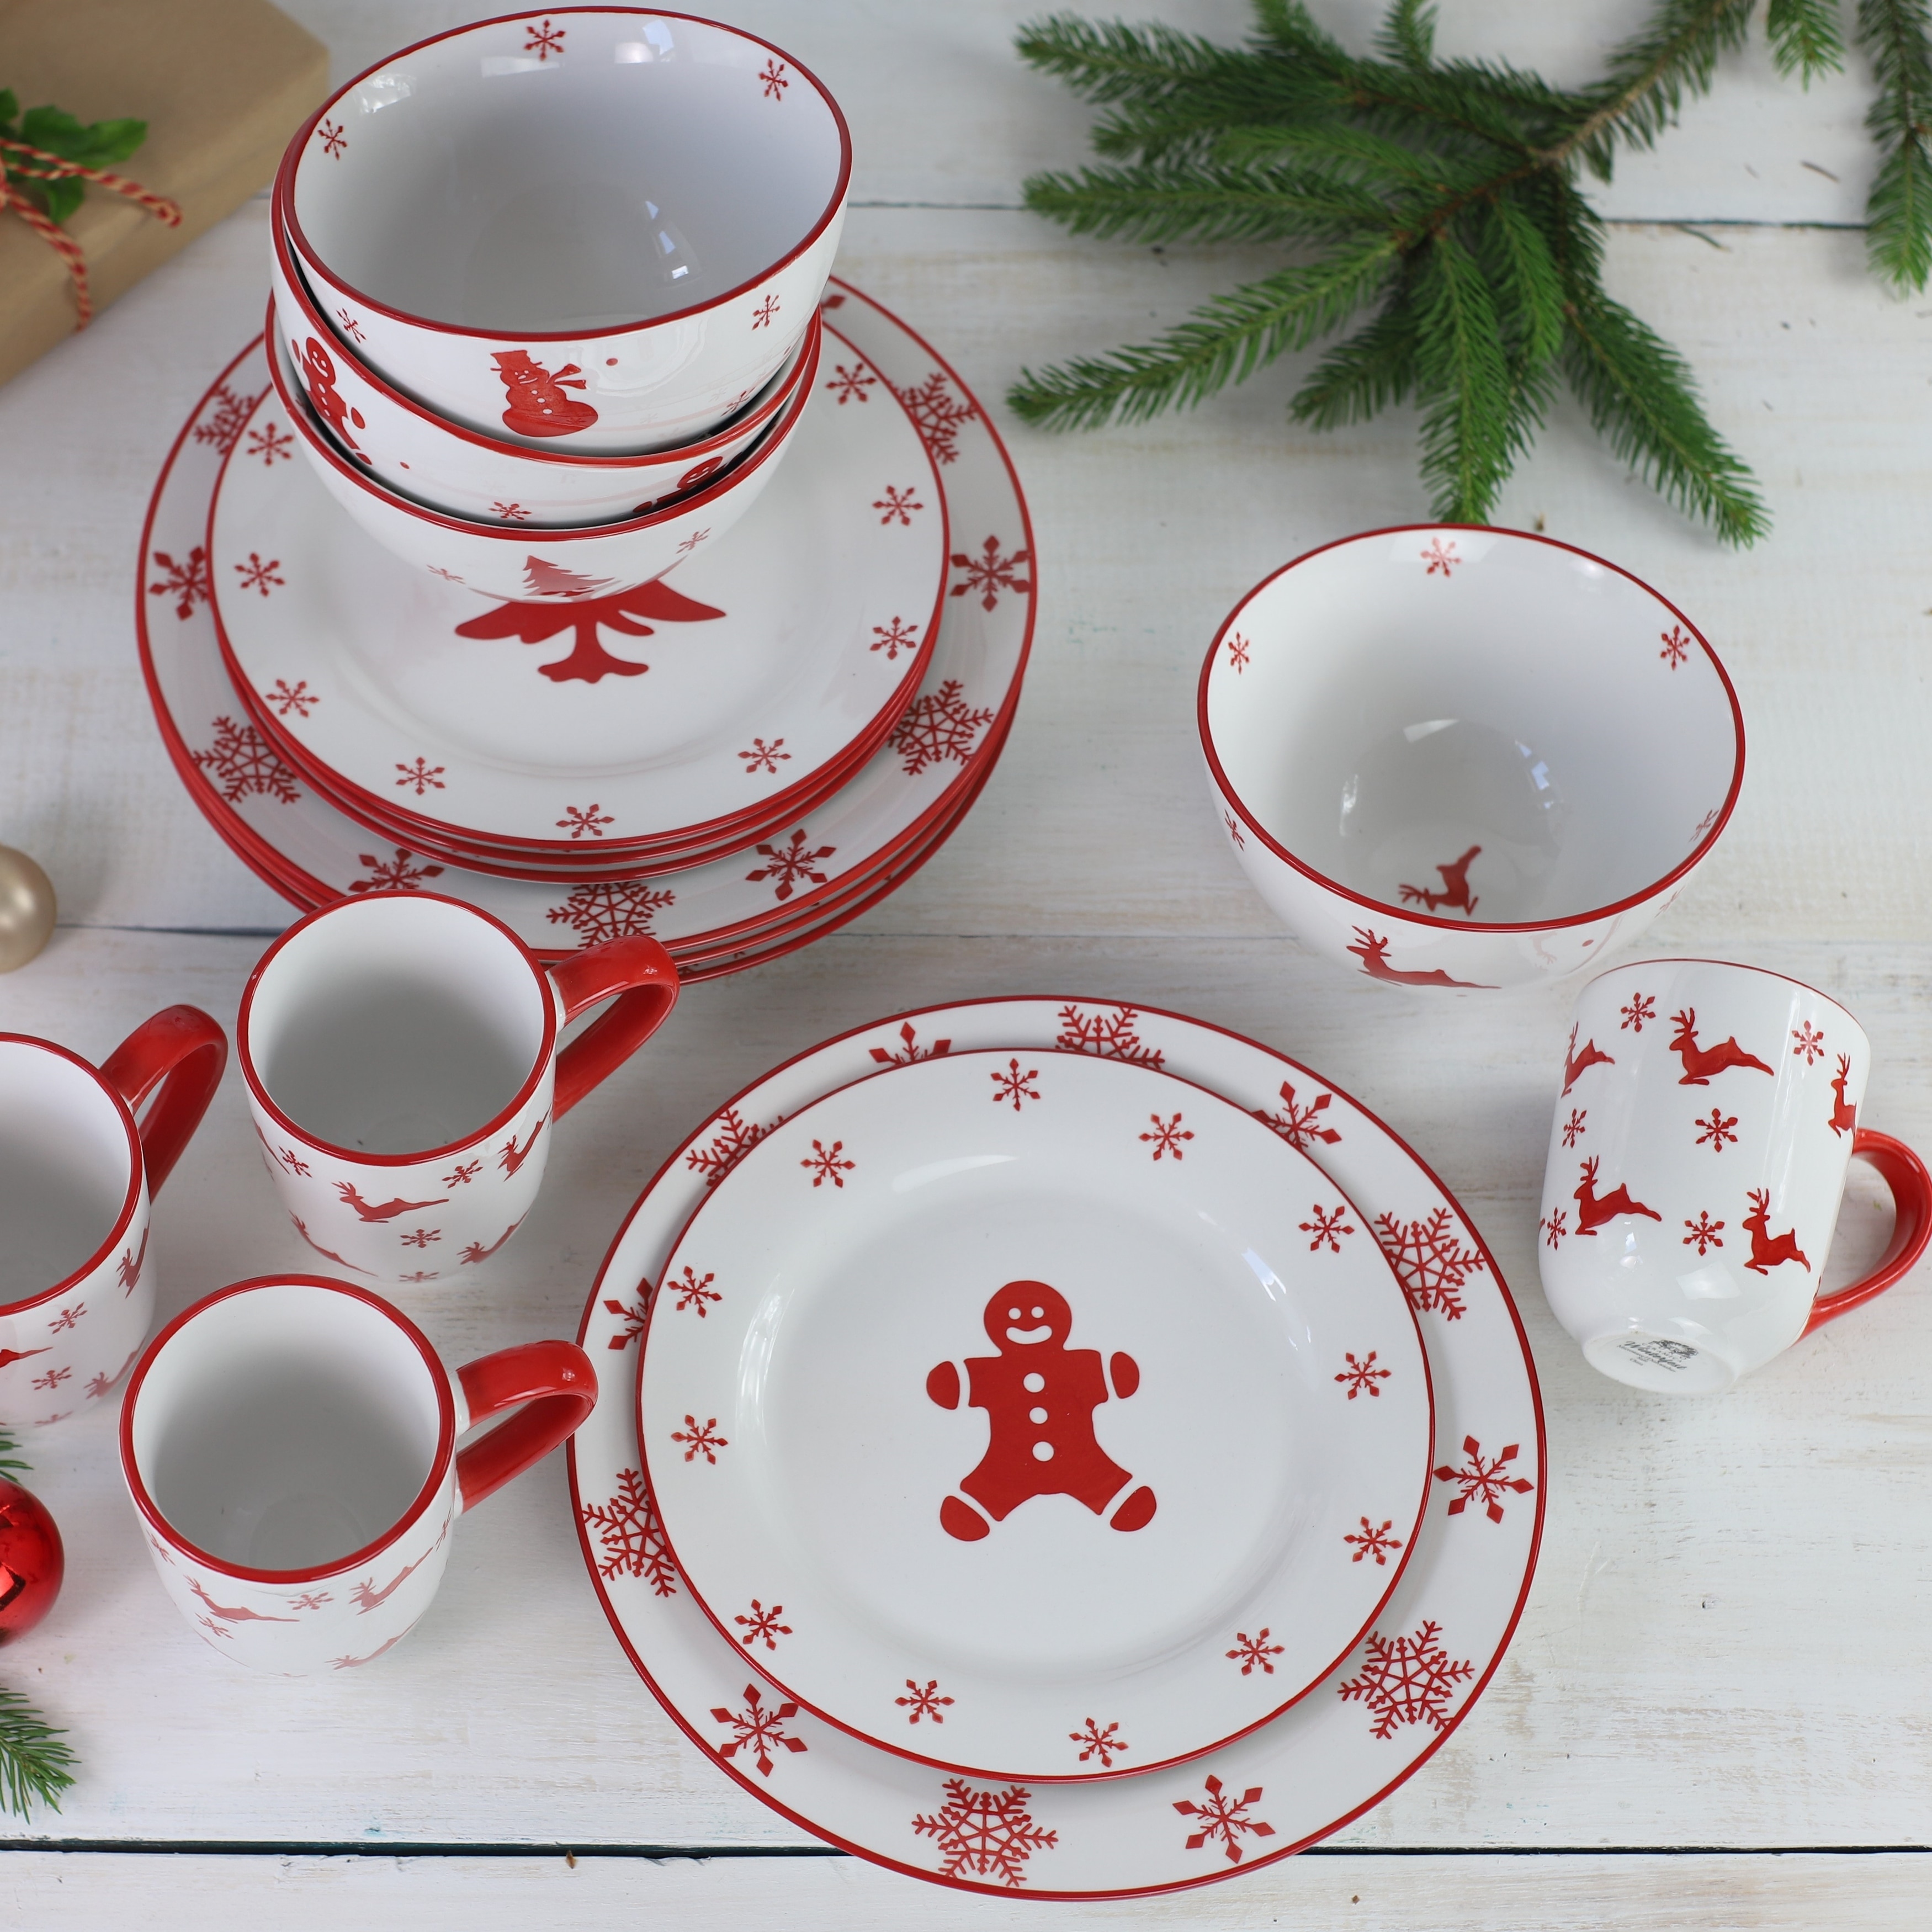 https://ak1.ostkcdn.com/images/products/is/images/direct/52a6b6c5082a62328ba0f36fa6d755b9d1f13e4f/Euro-Ceramica-Winterfest-Stoneware-16-Piece-Dinnerware-Set-%28Service-for-4%29.jpg